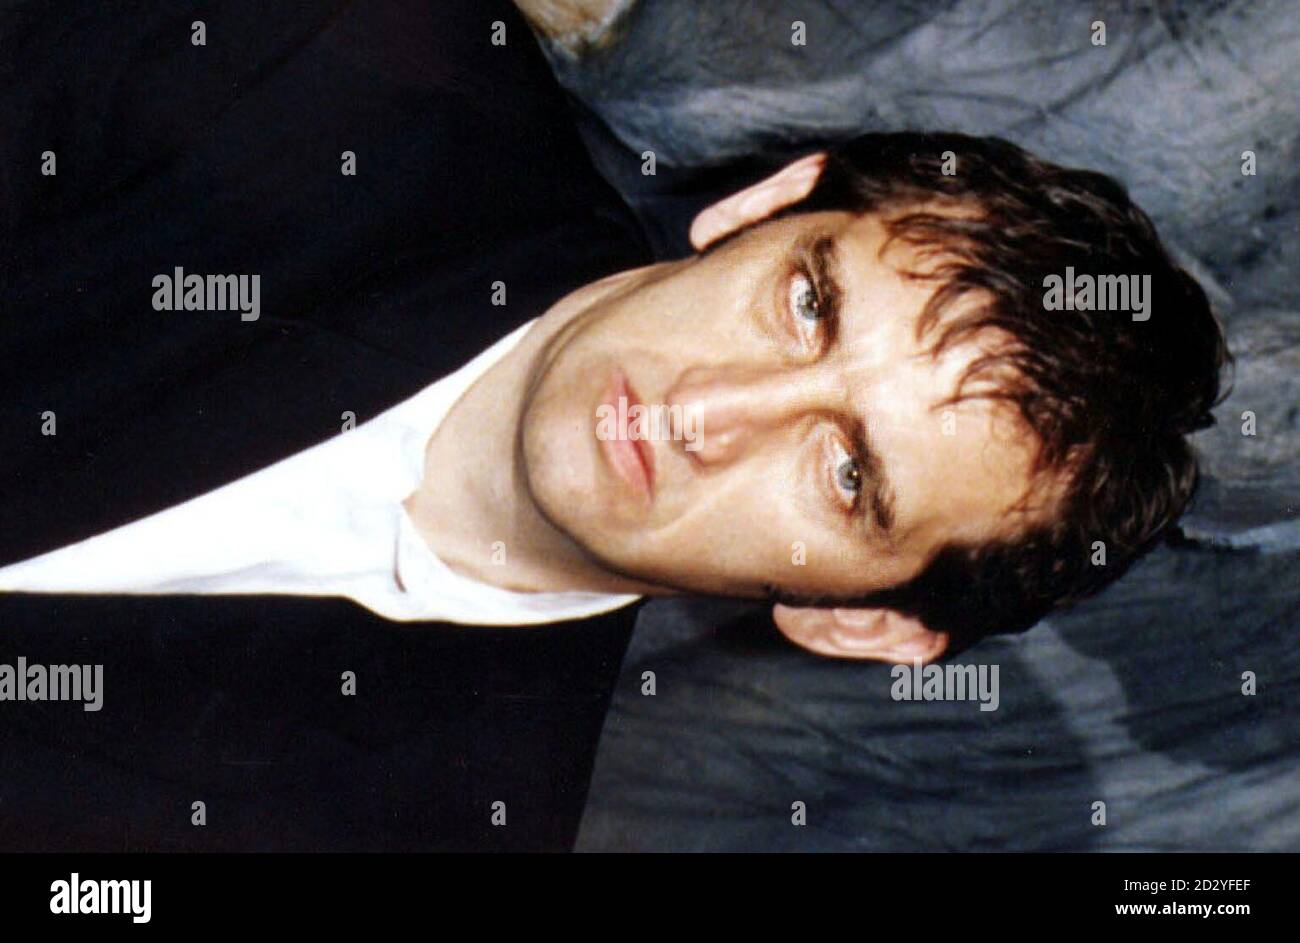 PA NEWS PHOTO : 18/7/97 : MUSICIAN AND ACTOR JIMMY NAIL WHO CELEBRATES HIS 44TH BIRTHDAY ON MONDAY 16TH MARCH 1998. PHOTO BY PETER JORDAN. Stock Photo